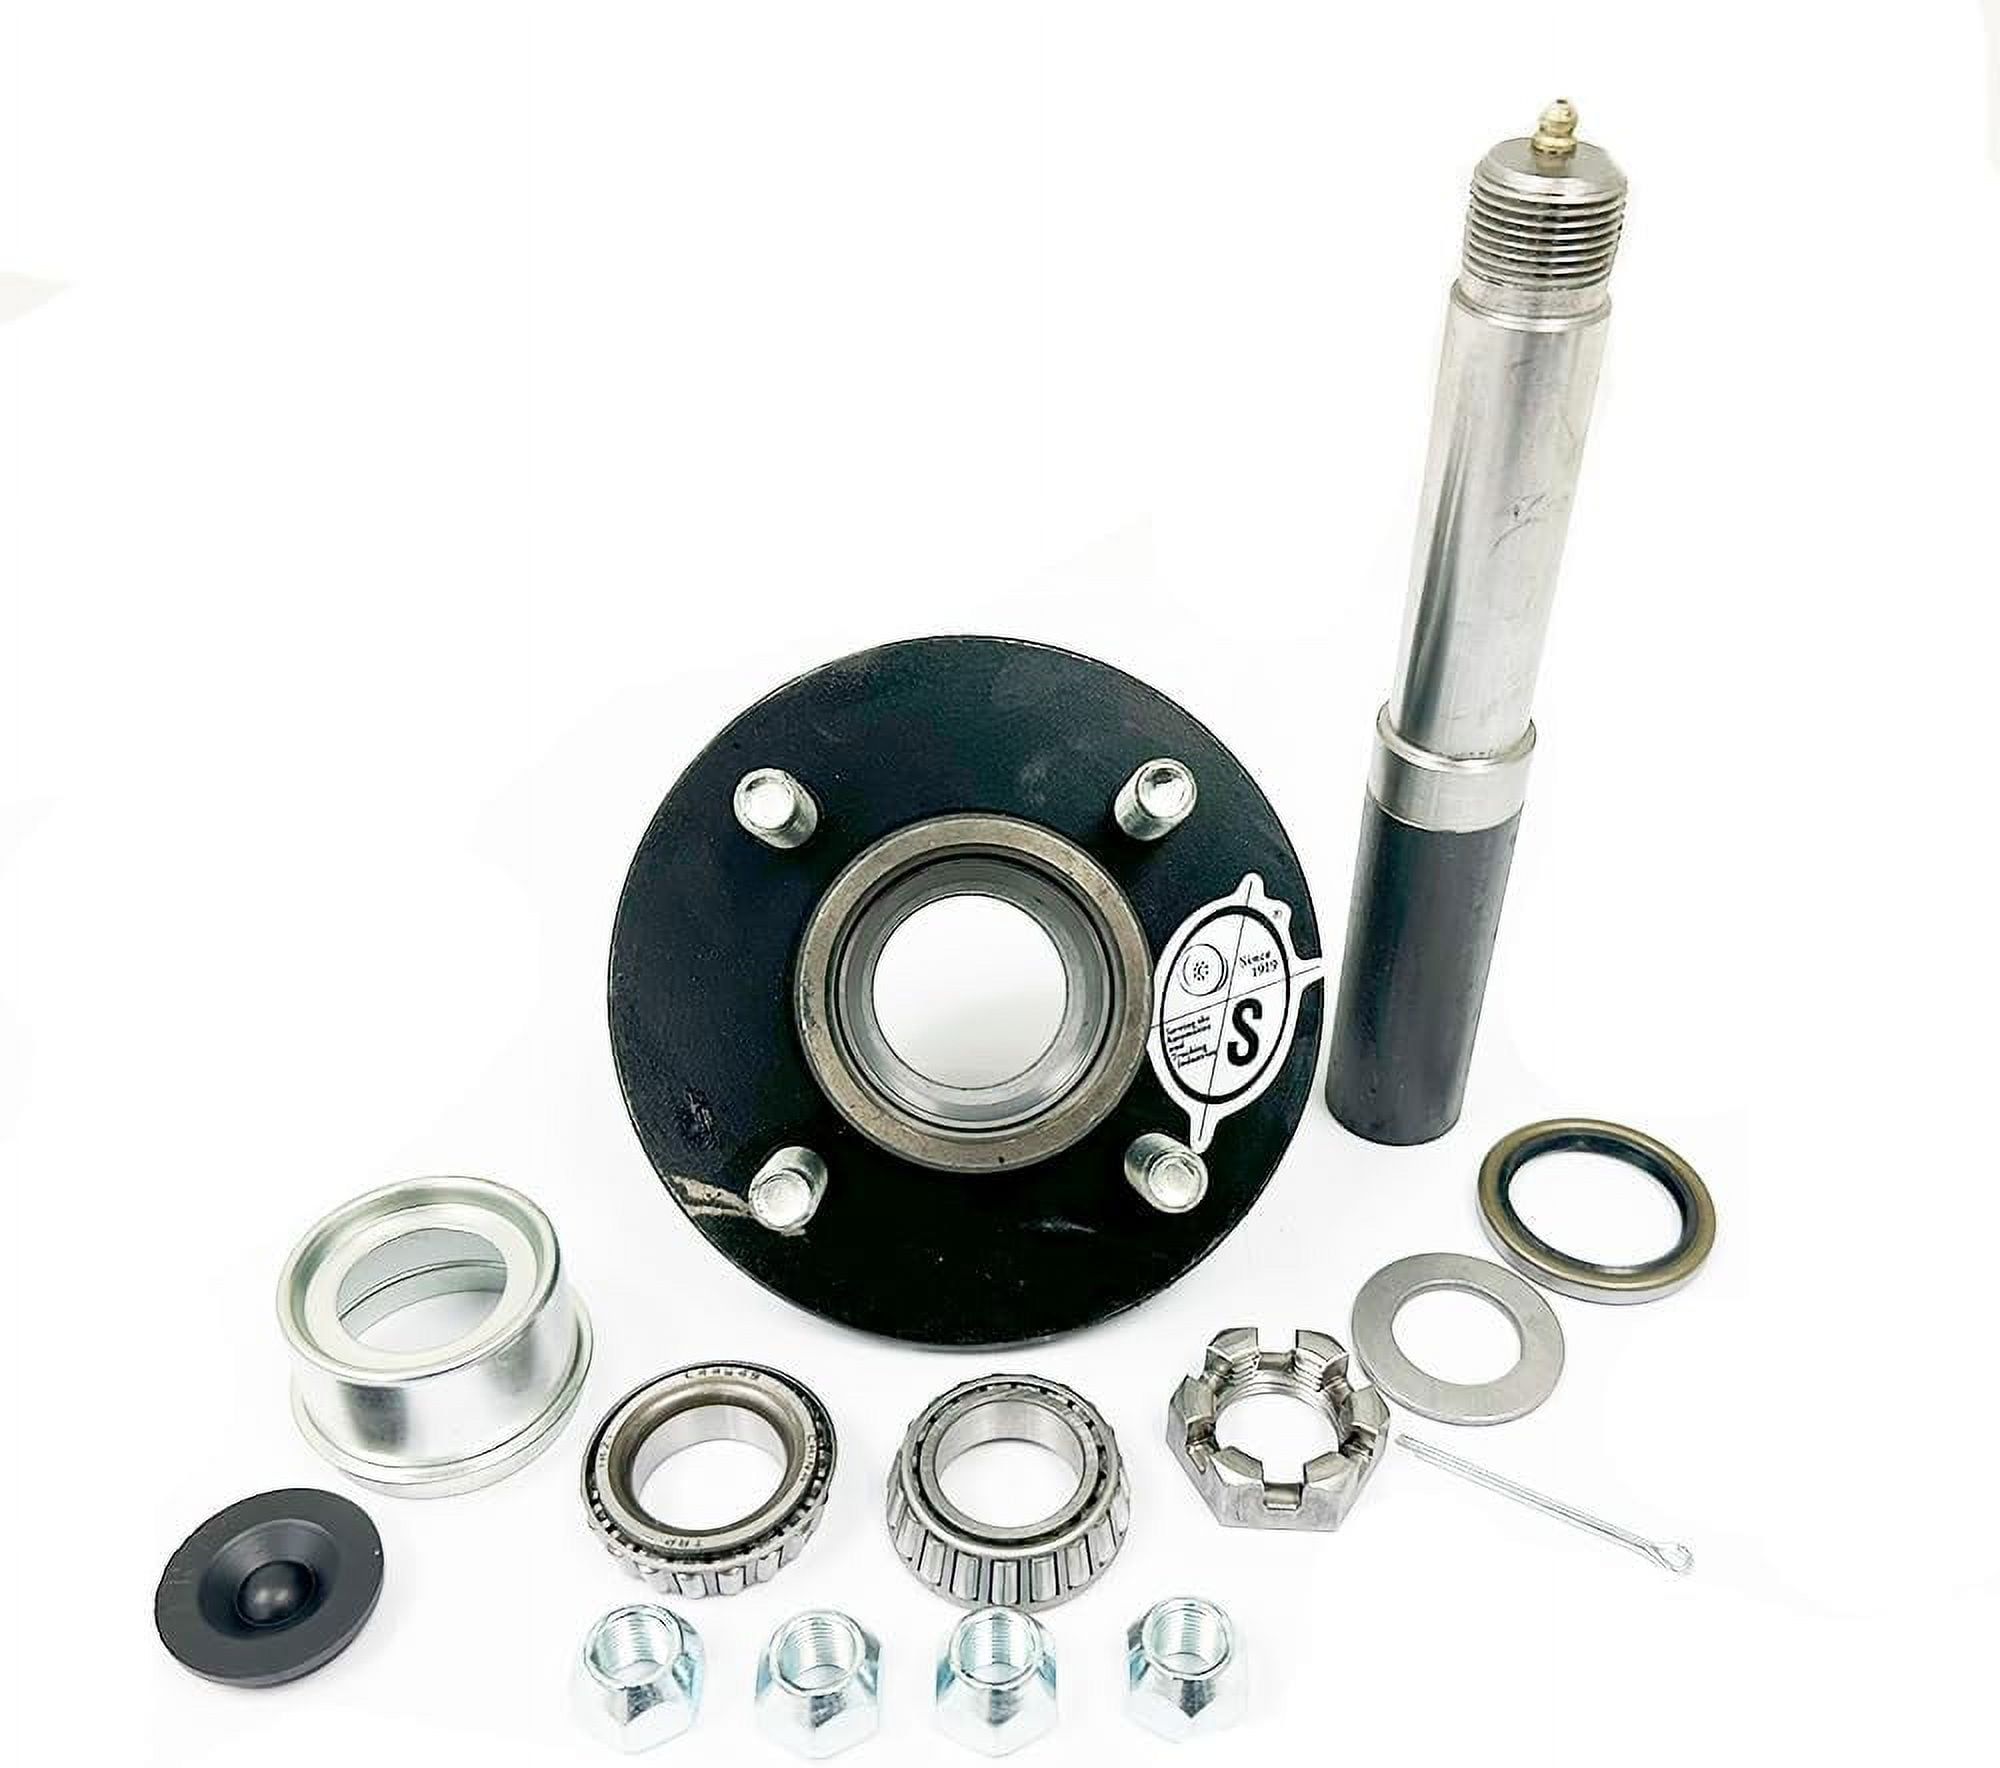 SOUTHWEST WHEEL 2,000 lbs Trailer Axle Spindle (BT9) with 4-4 Bolt Circle  Hub That uses L44649 Trailer Bearings